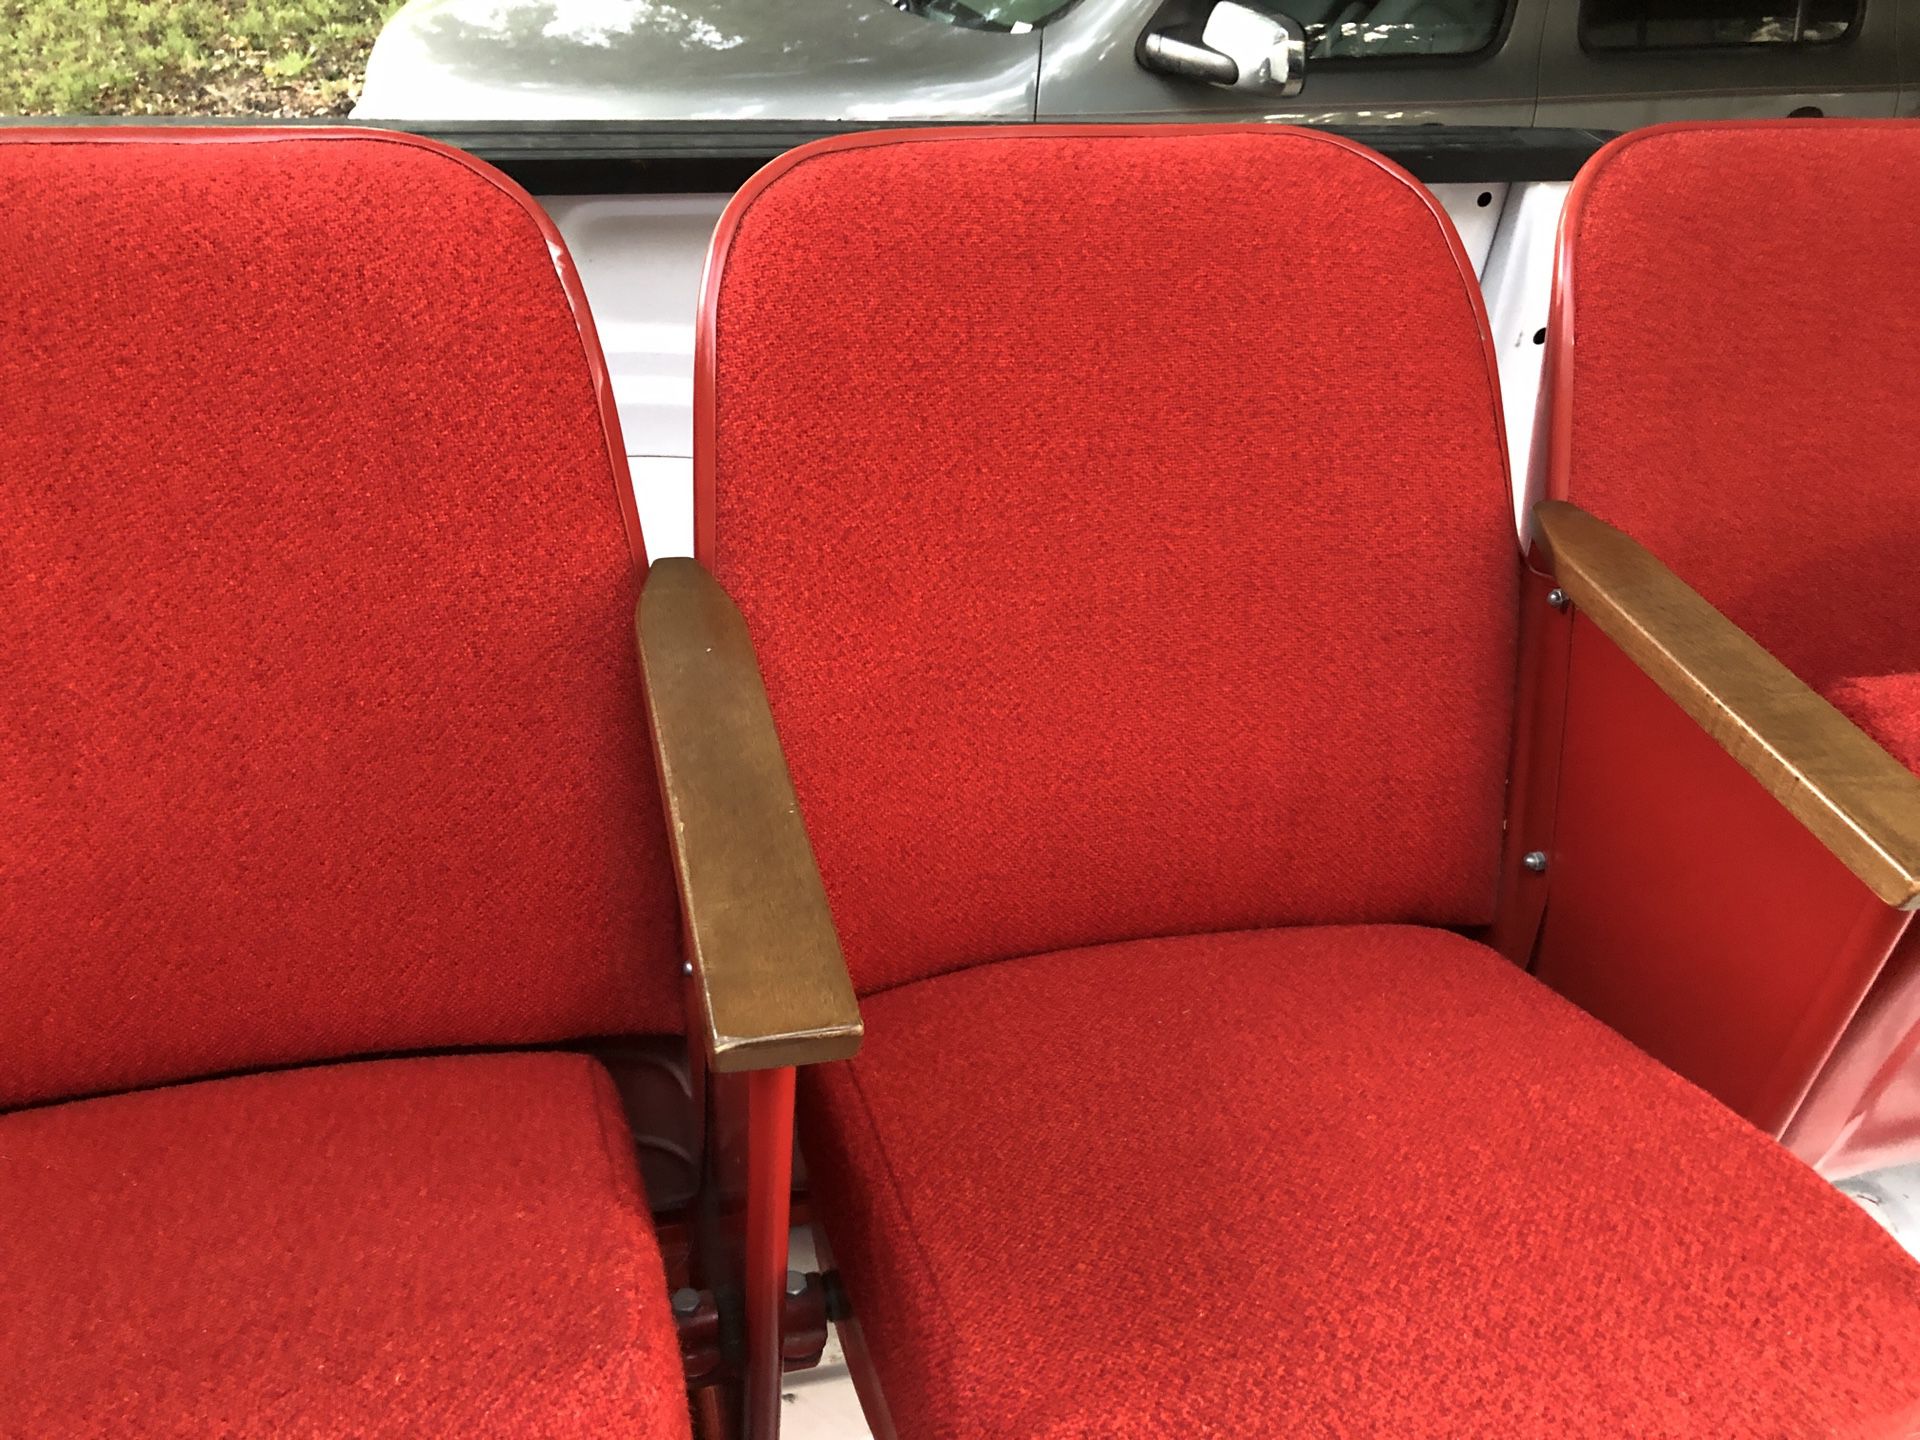 Red theater seats great for man cave hunting camp are at home